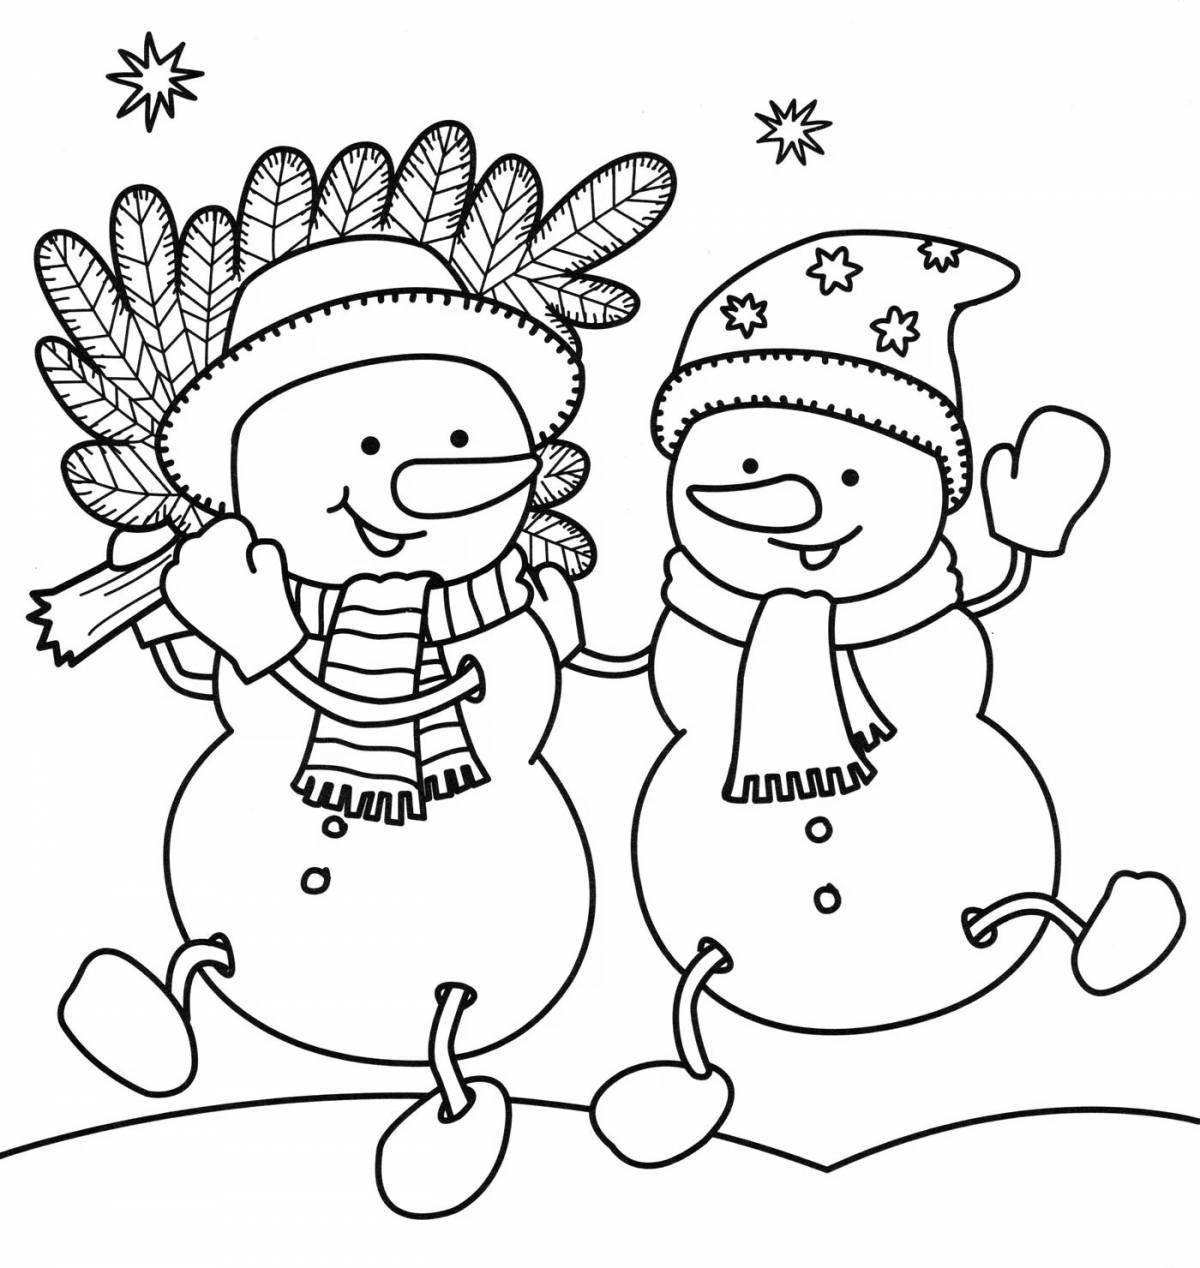 Bright family coloring of snowmen